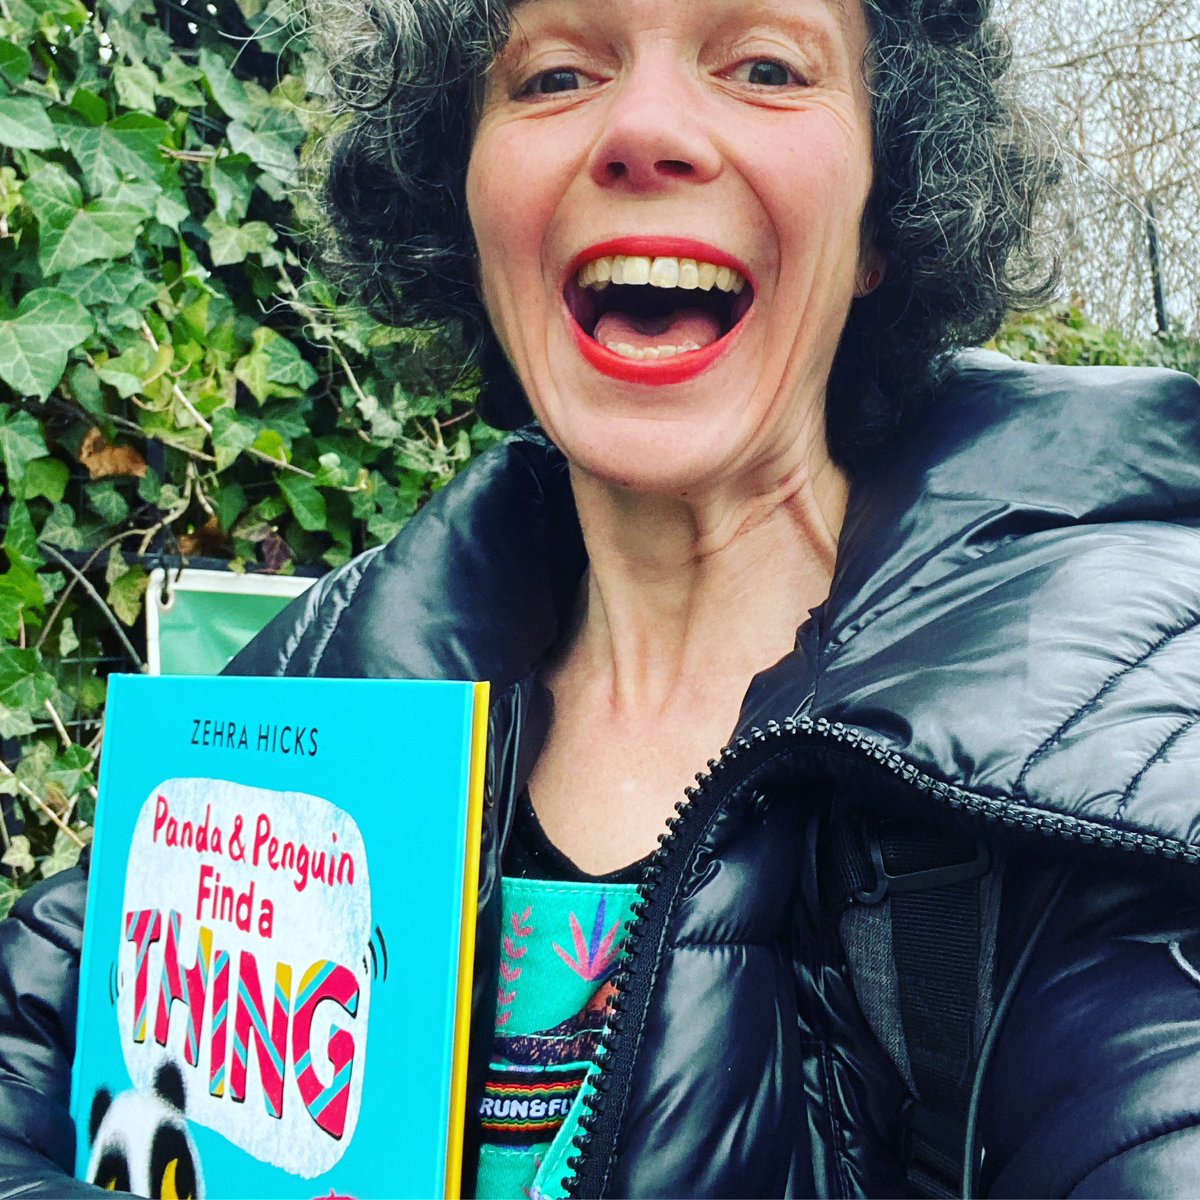 World Book Day / Week / Month is ON. 💪📚🎉 First world book day school visit today out of eight. I’m ready! Dinosaur dress ✅ New book ✅ Lippy ✅ Enthusiasm and a big smile✅ #worldbookday #worldbookday2024 #schoolvisit #author #illustrator